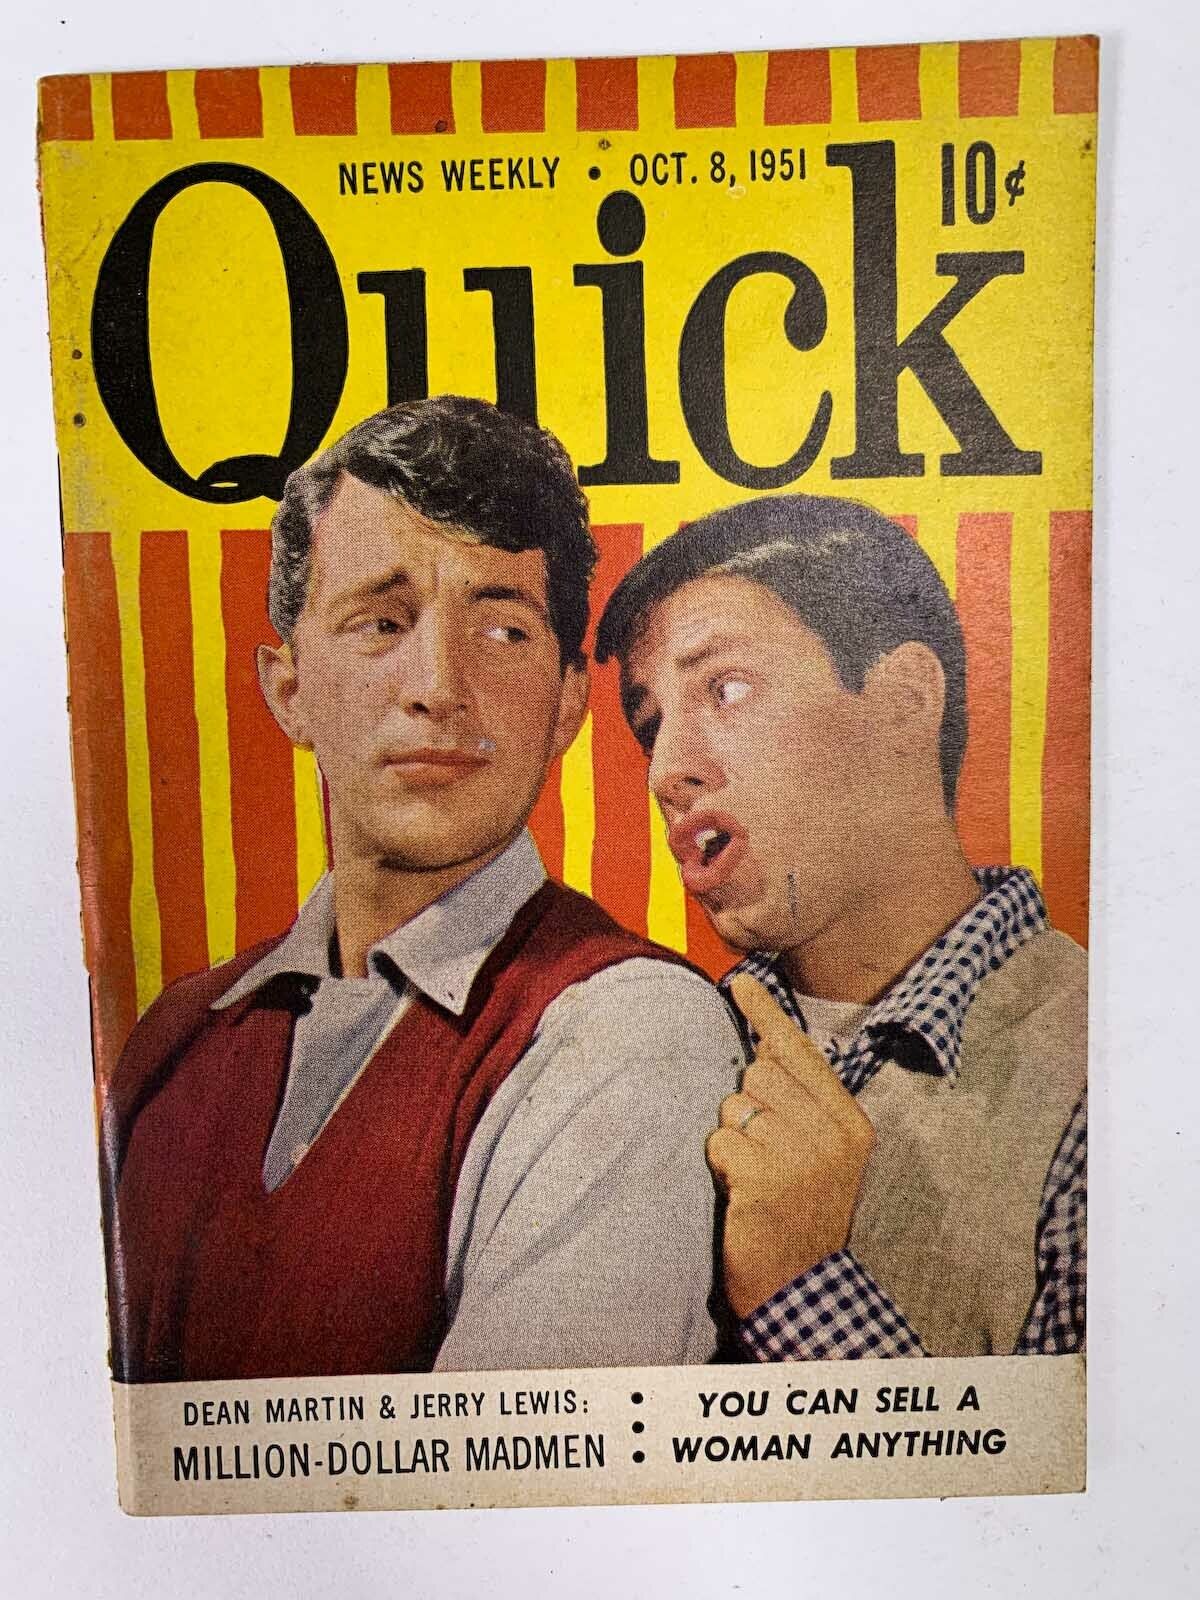 Quick News Weekly Magazine October 8 1951 cover Dean Martin Jerry Lewis